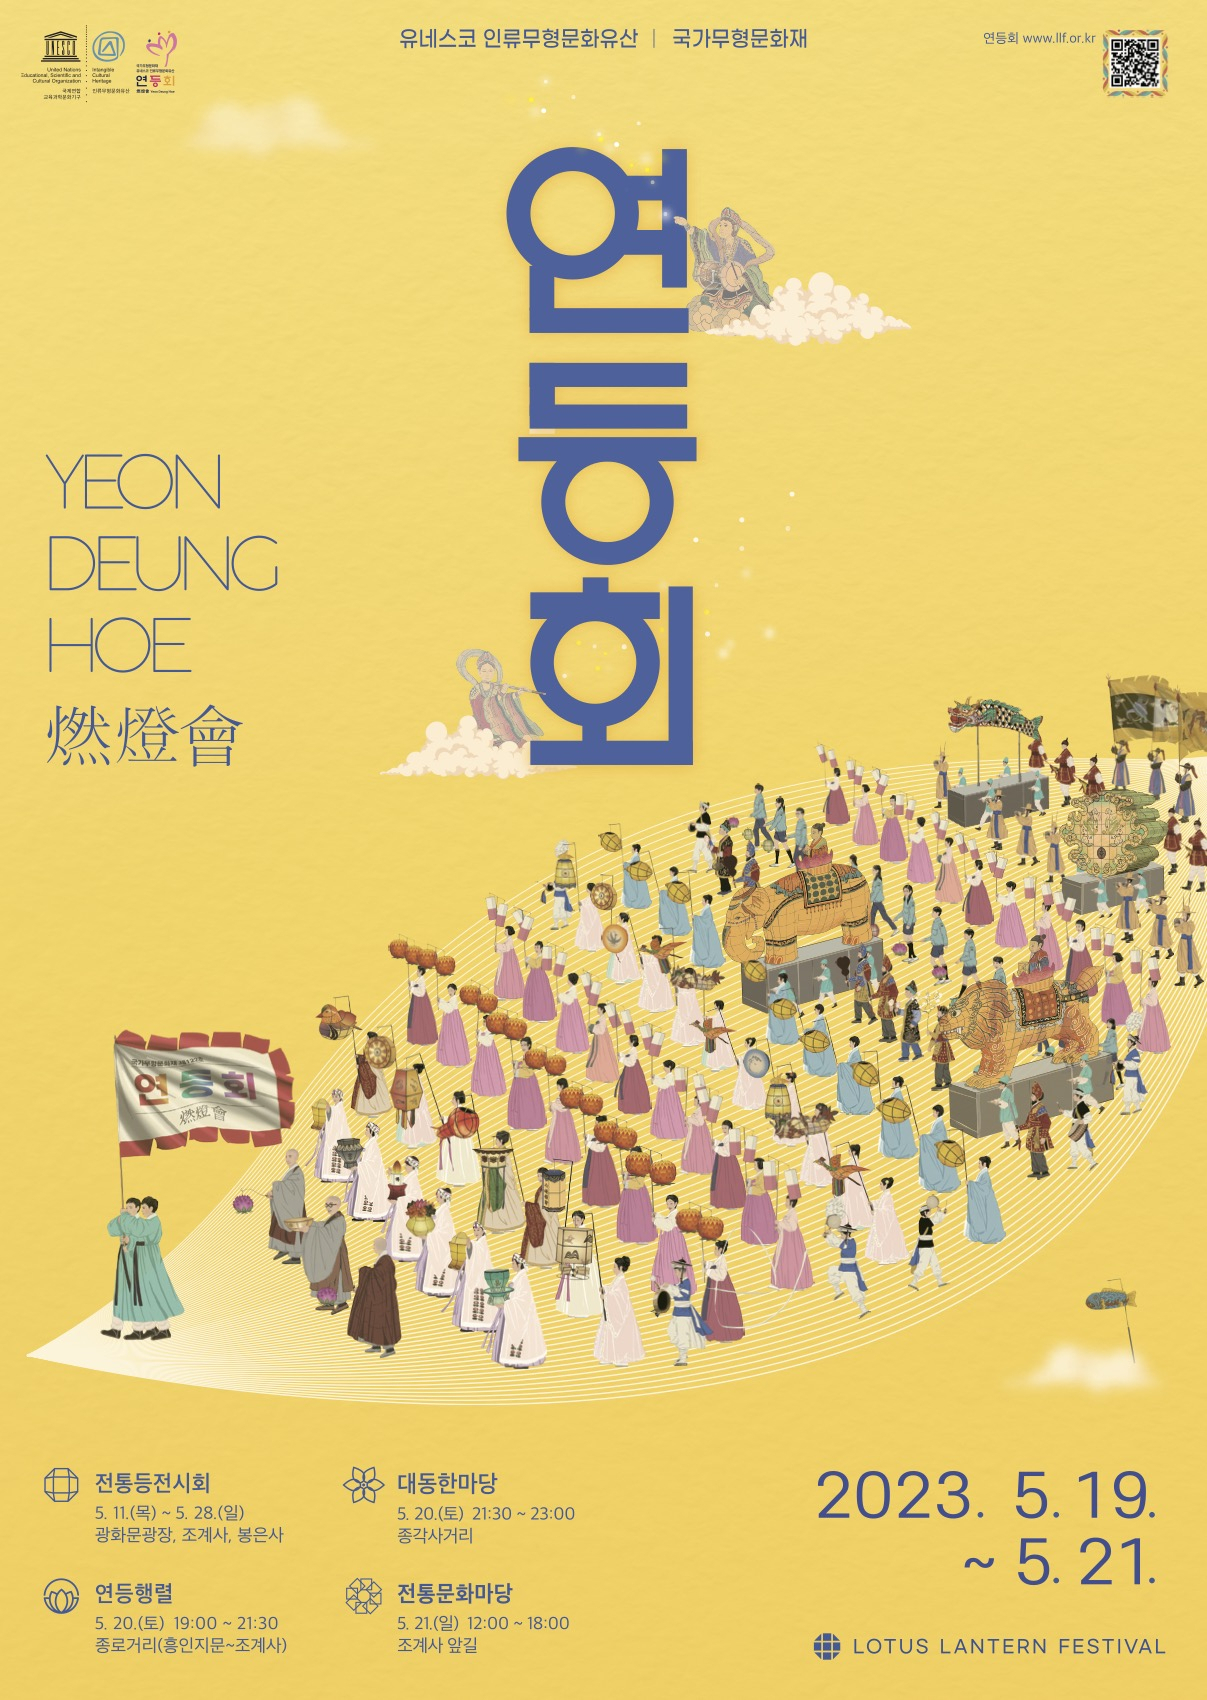 Poster for 2023 Yeondeunghoe, or Lotus Lantern Festival (Yeondeunghoe)